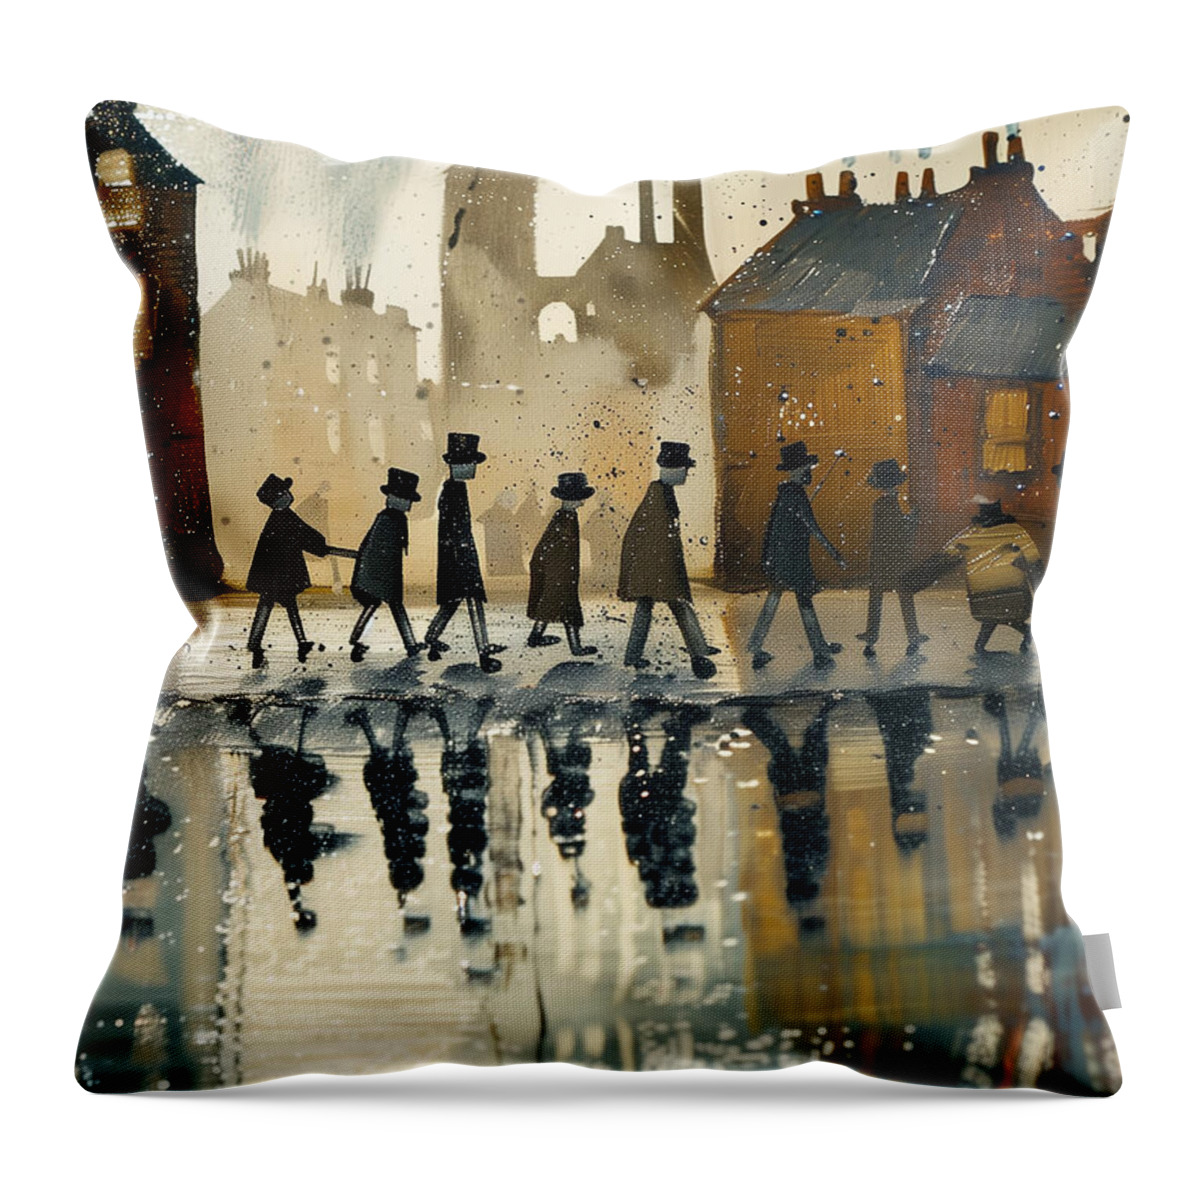  Throw Pillow featuring the mixed media Matchstalk Men #48 by Stephen Smith Galleries